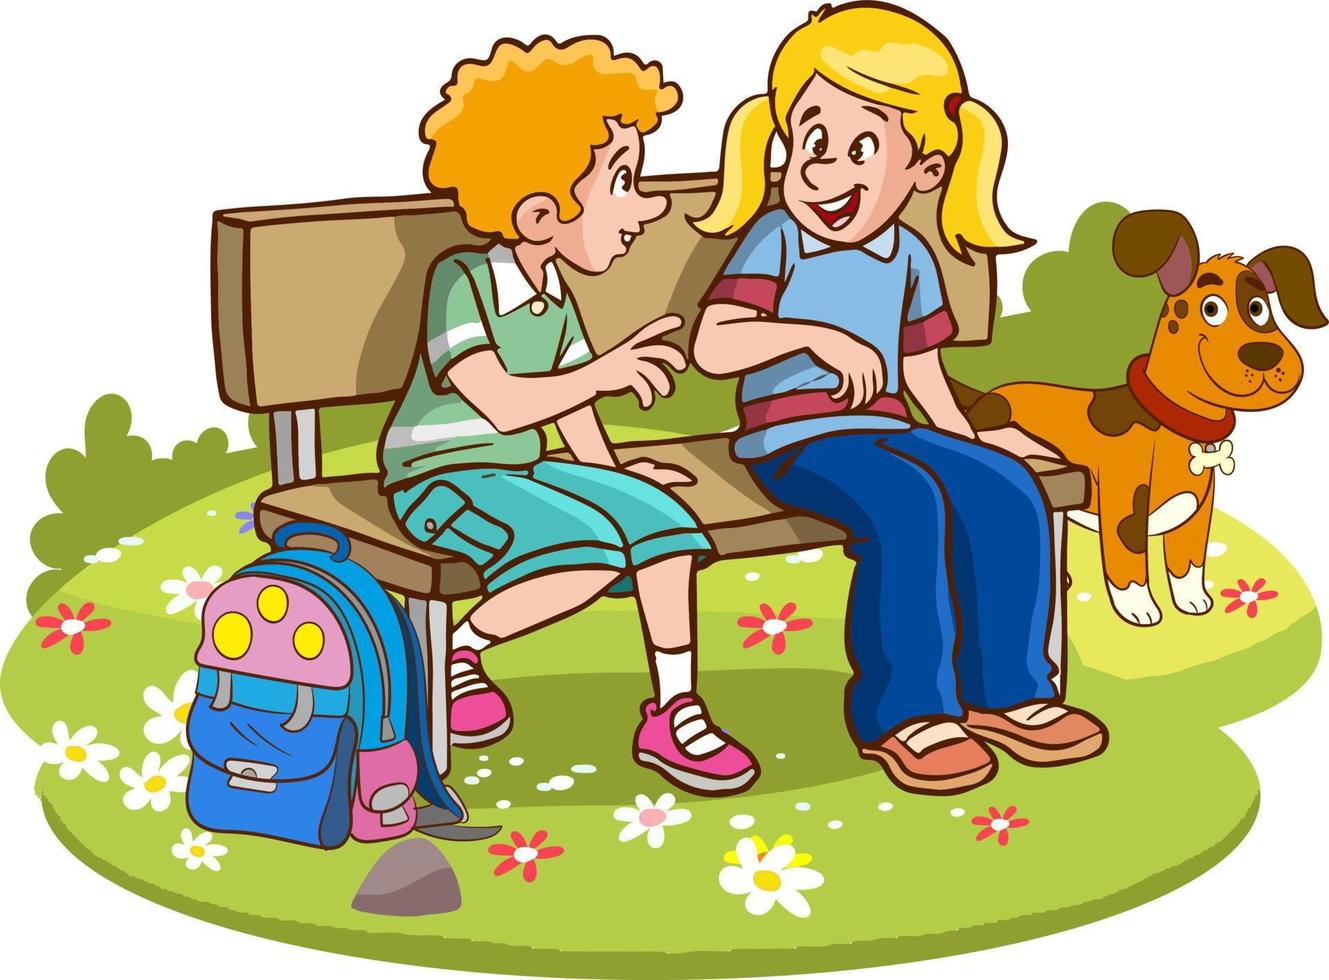 kids sitting on bench and talking cartoon vector